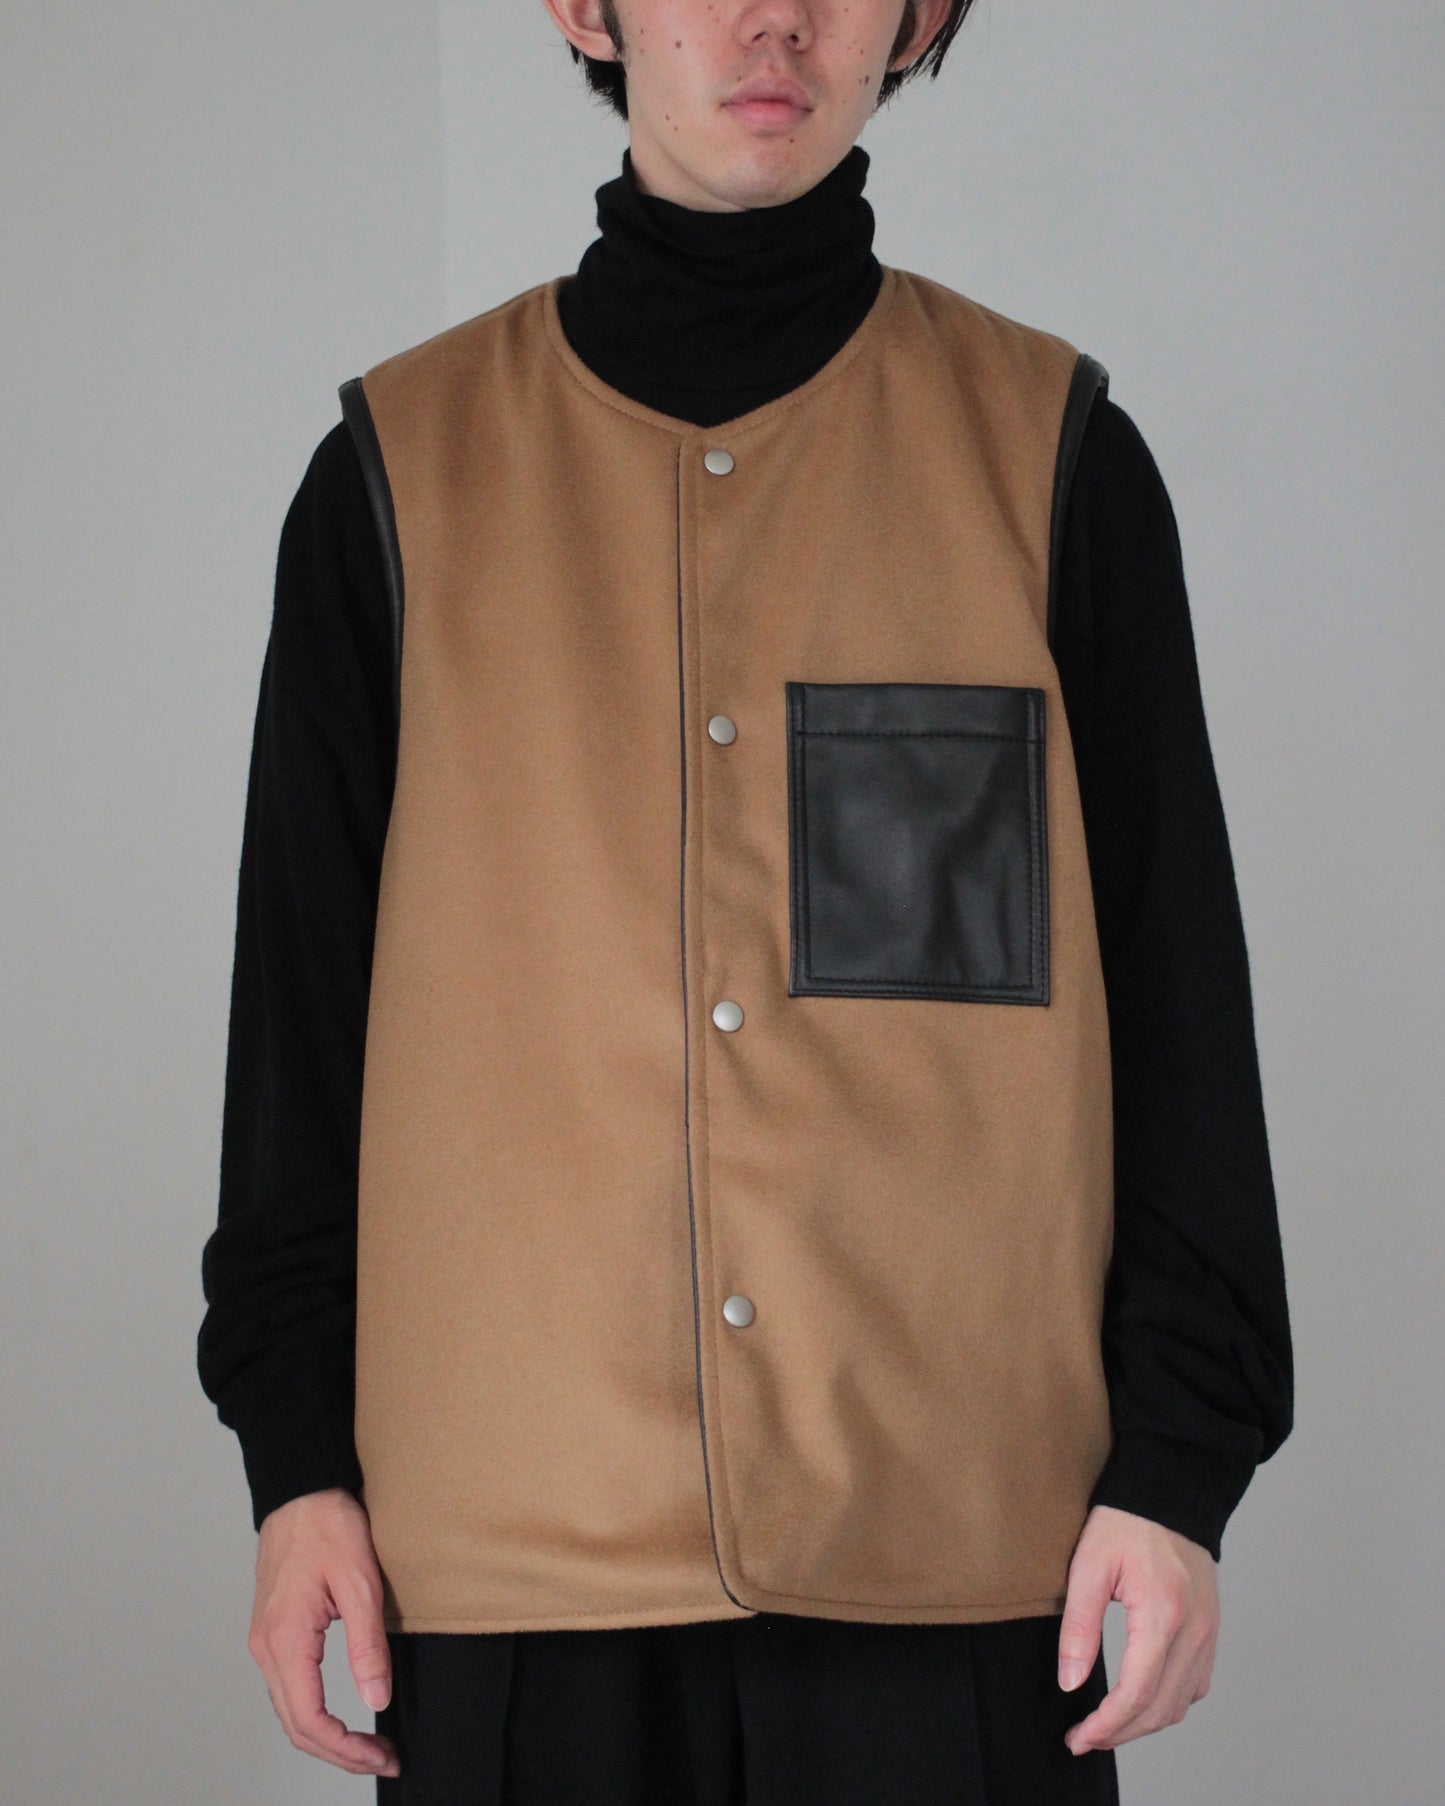 seven by seven/REVERSIBLE LEATHER VEST - Cow leather/Cashmere beaver -